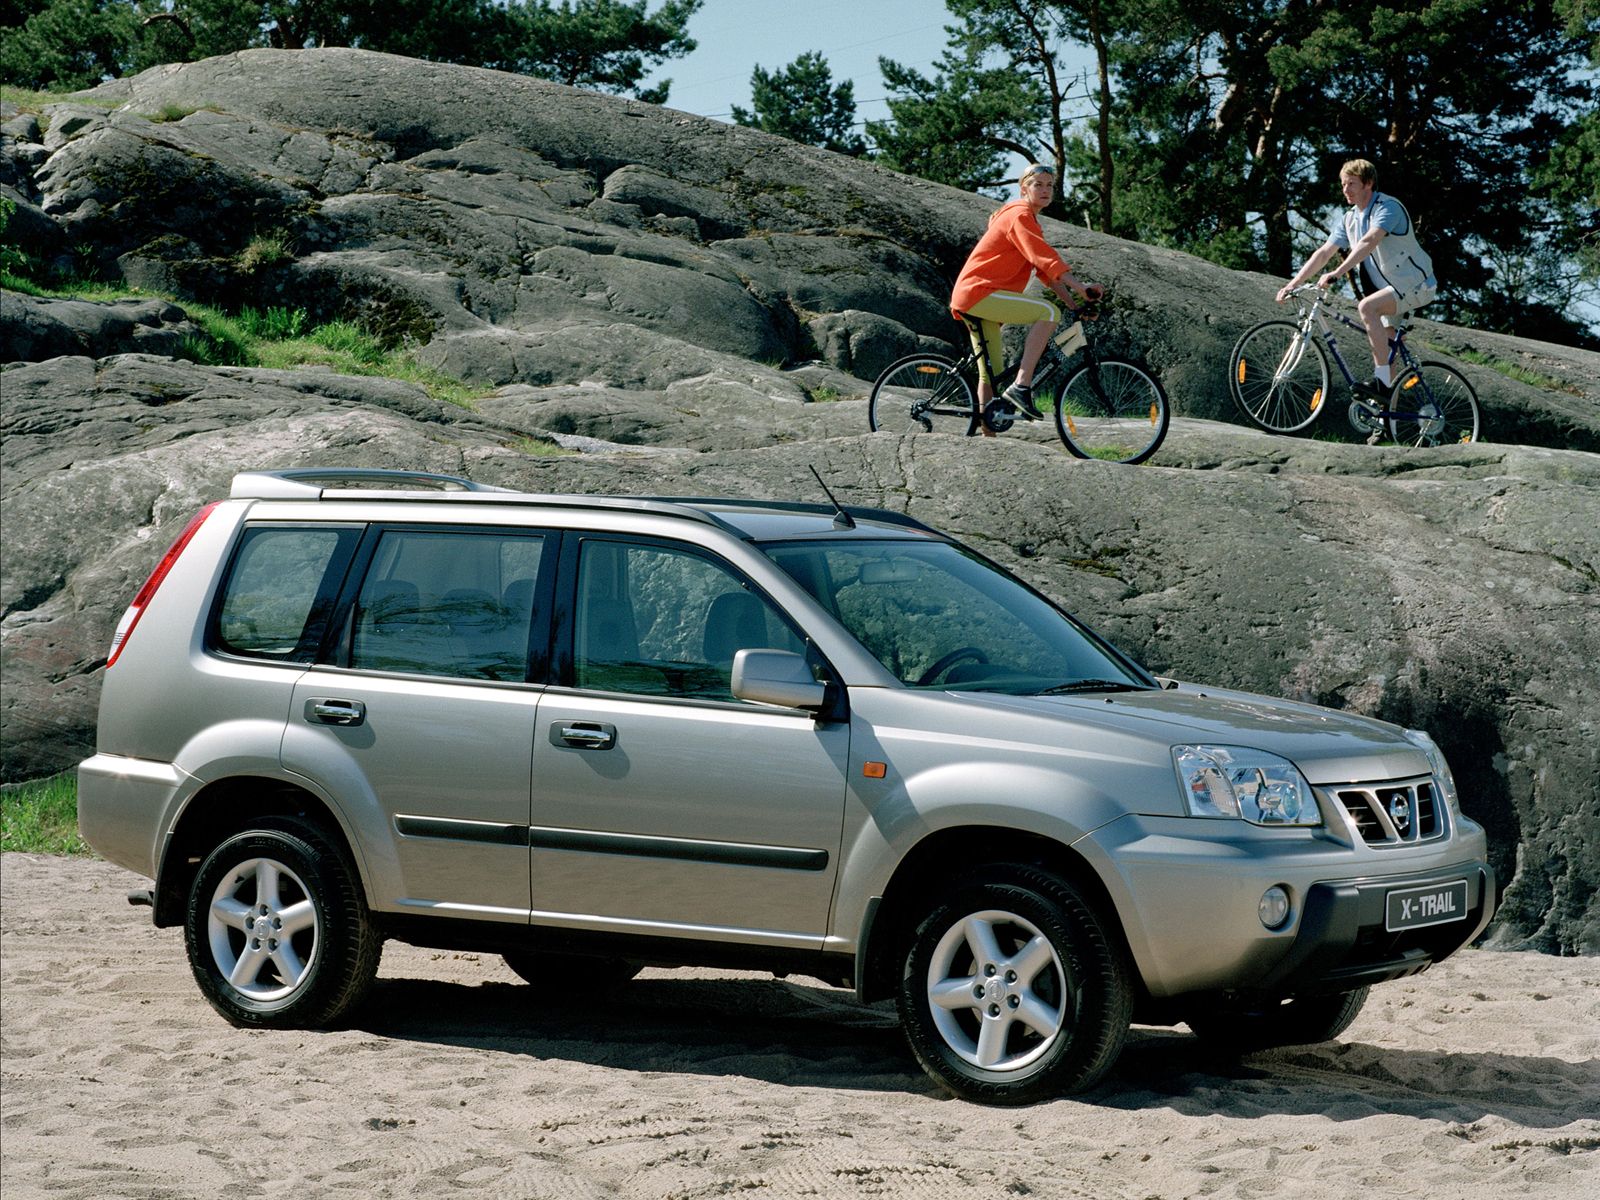 Nissan x trail picture gallery #8